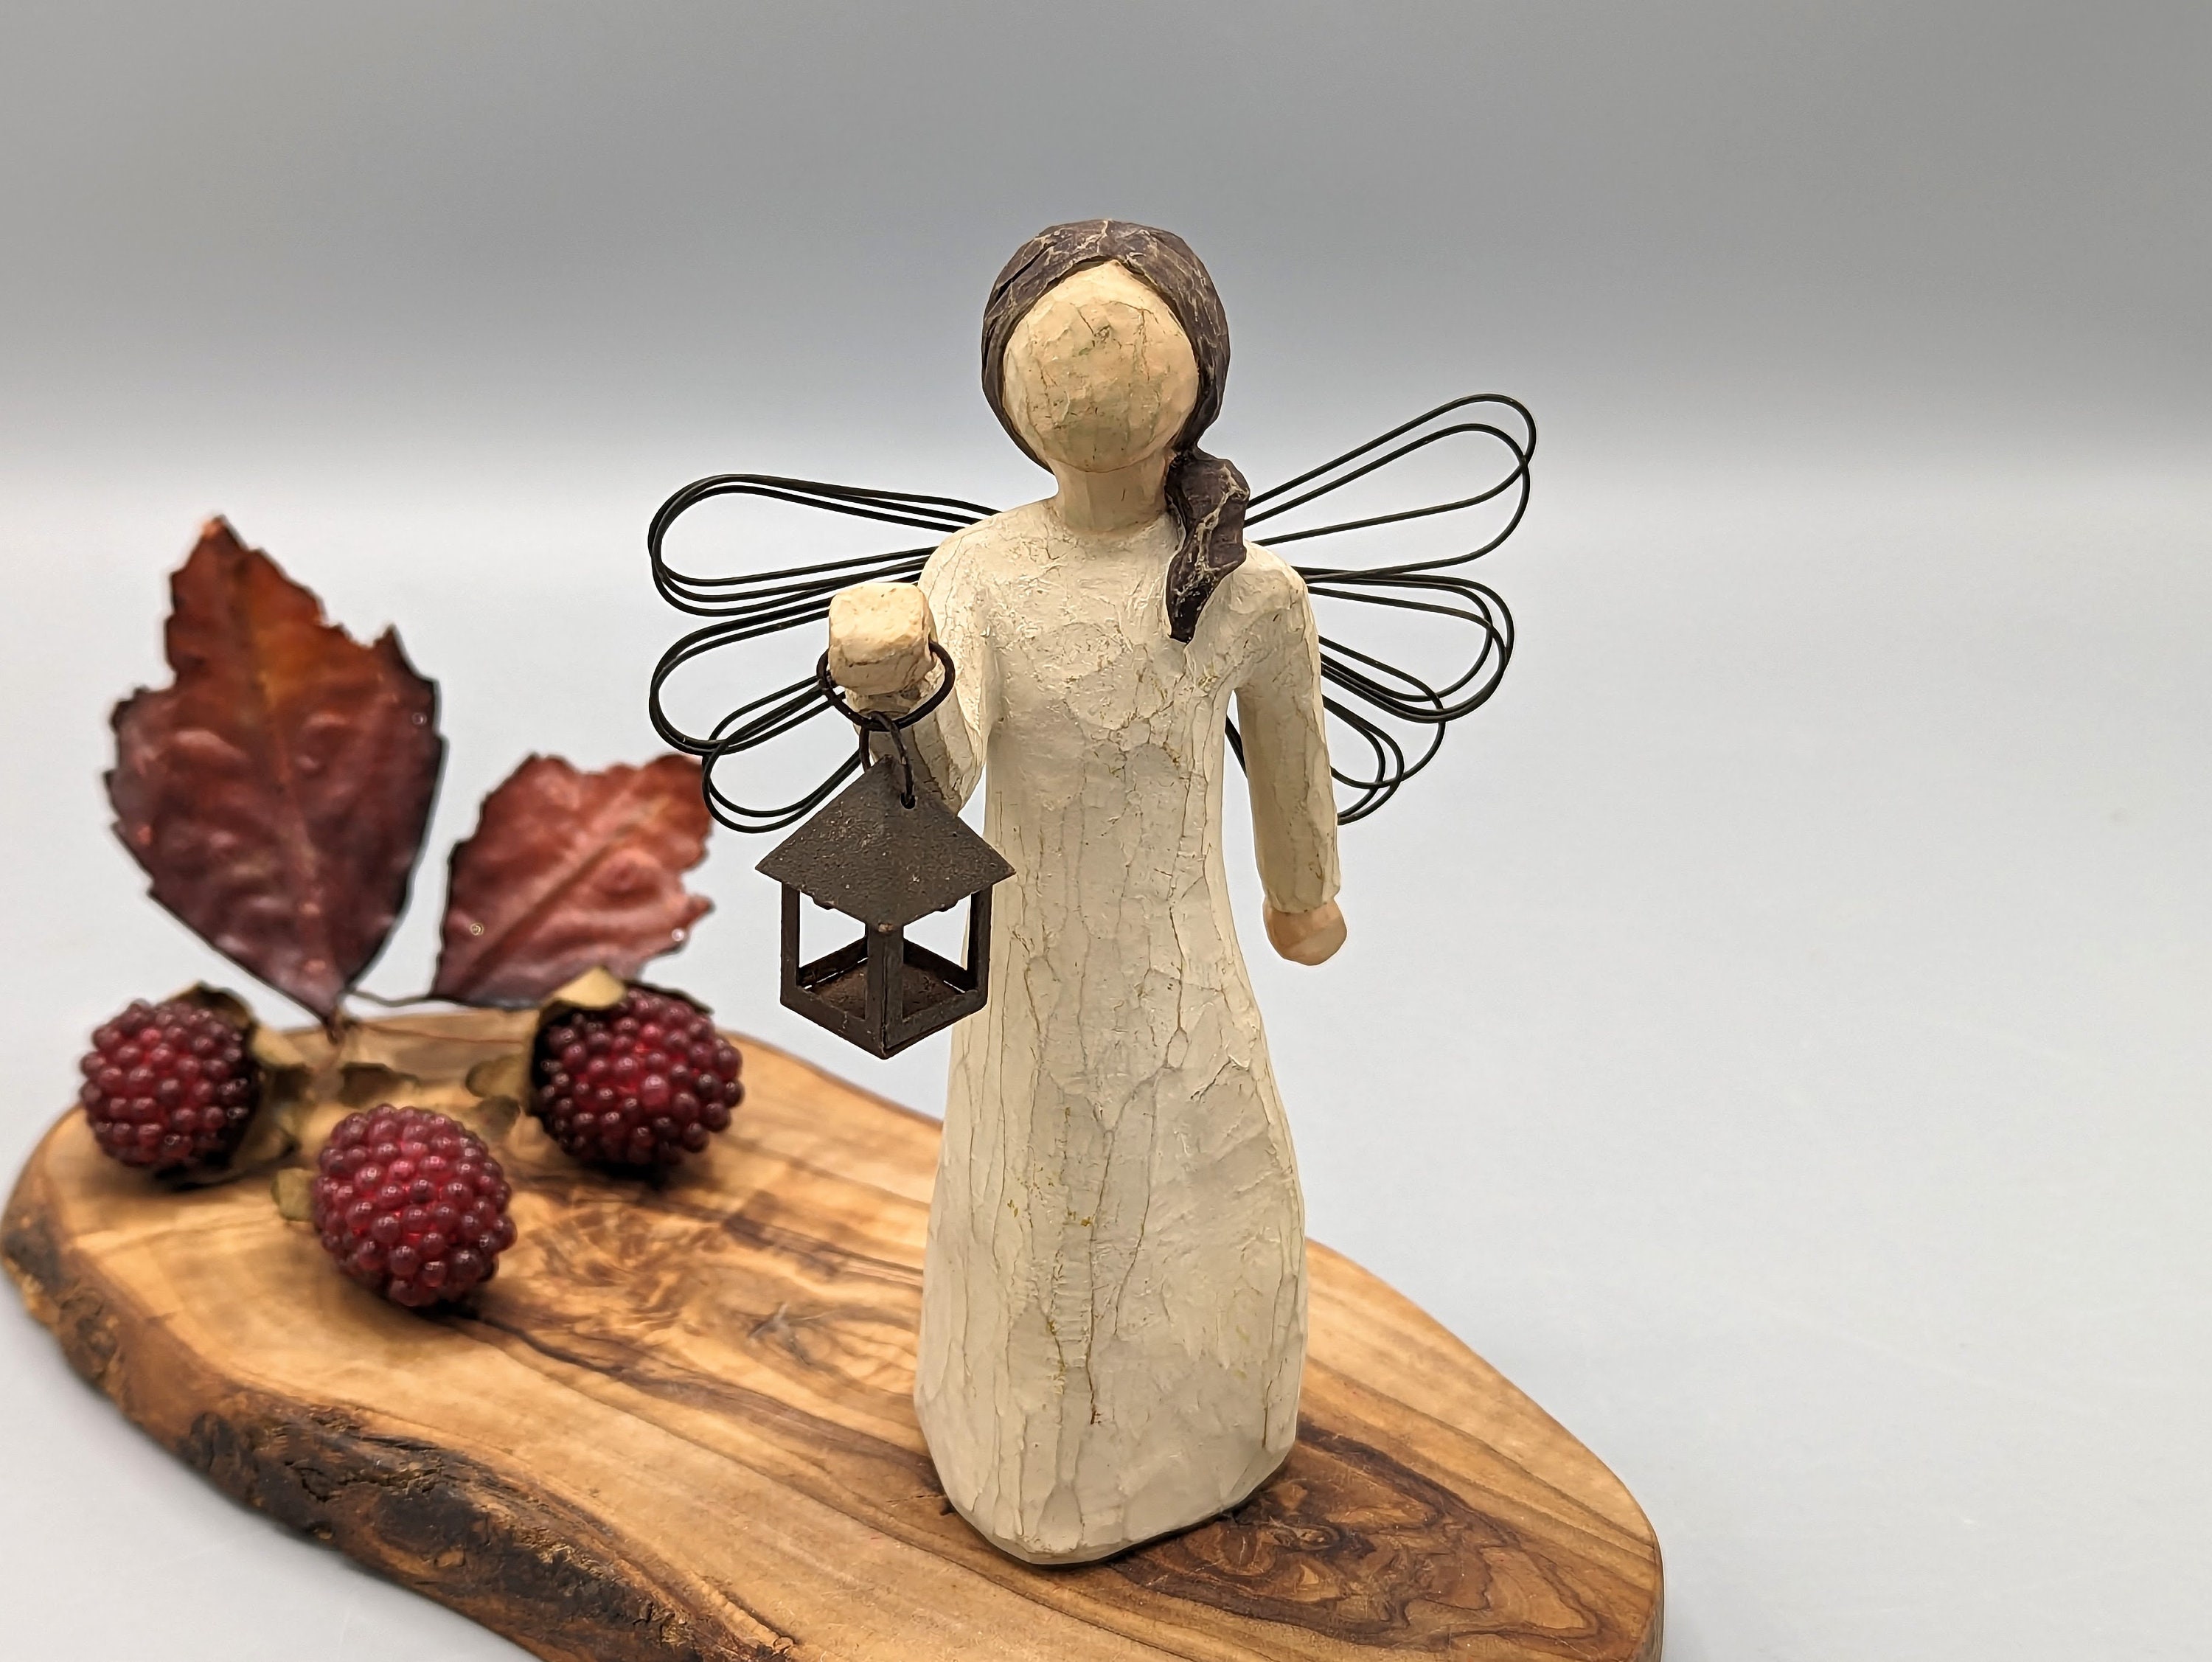 Vintage 2000 Willow Tree Angel of Hope with Lantern Figurine by Susan Lordi  DEMDACO, Vintage Religious Angel Lover Gift, Angel Home Decor